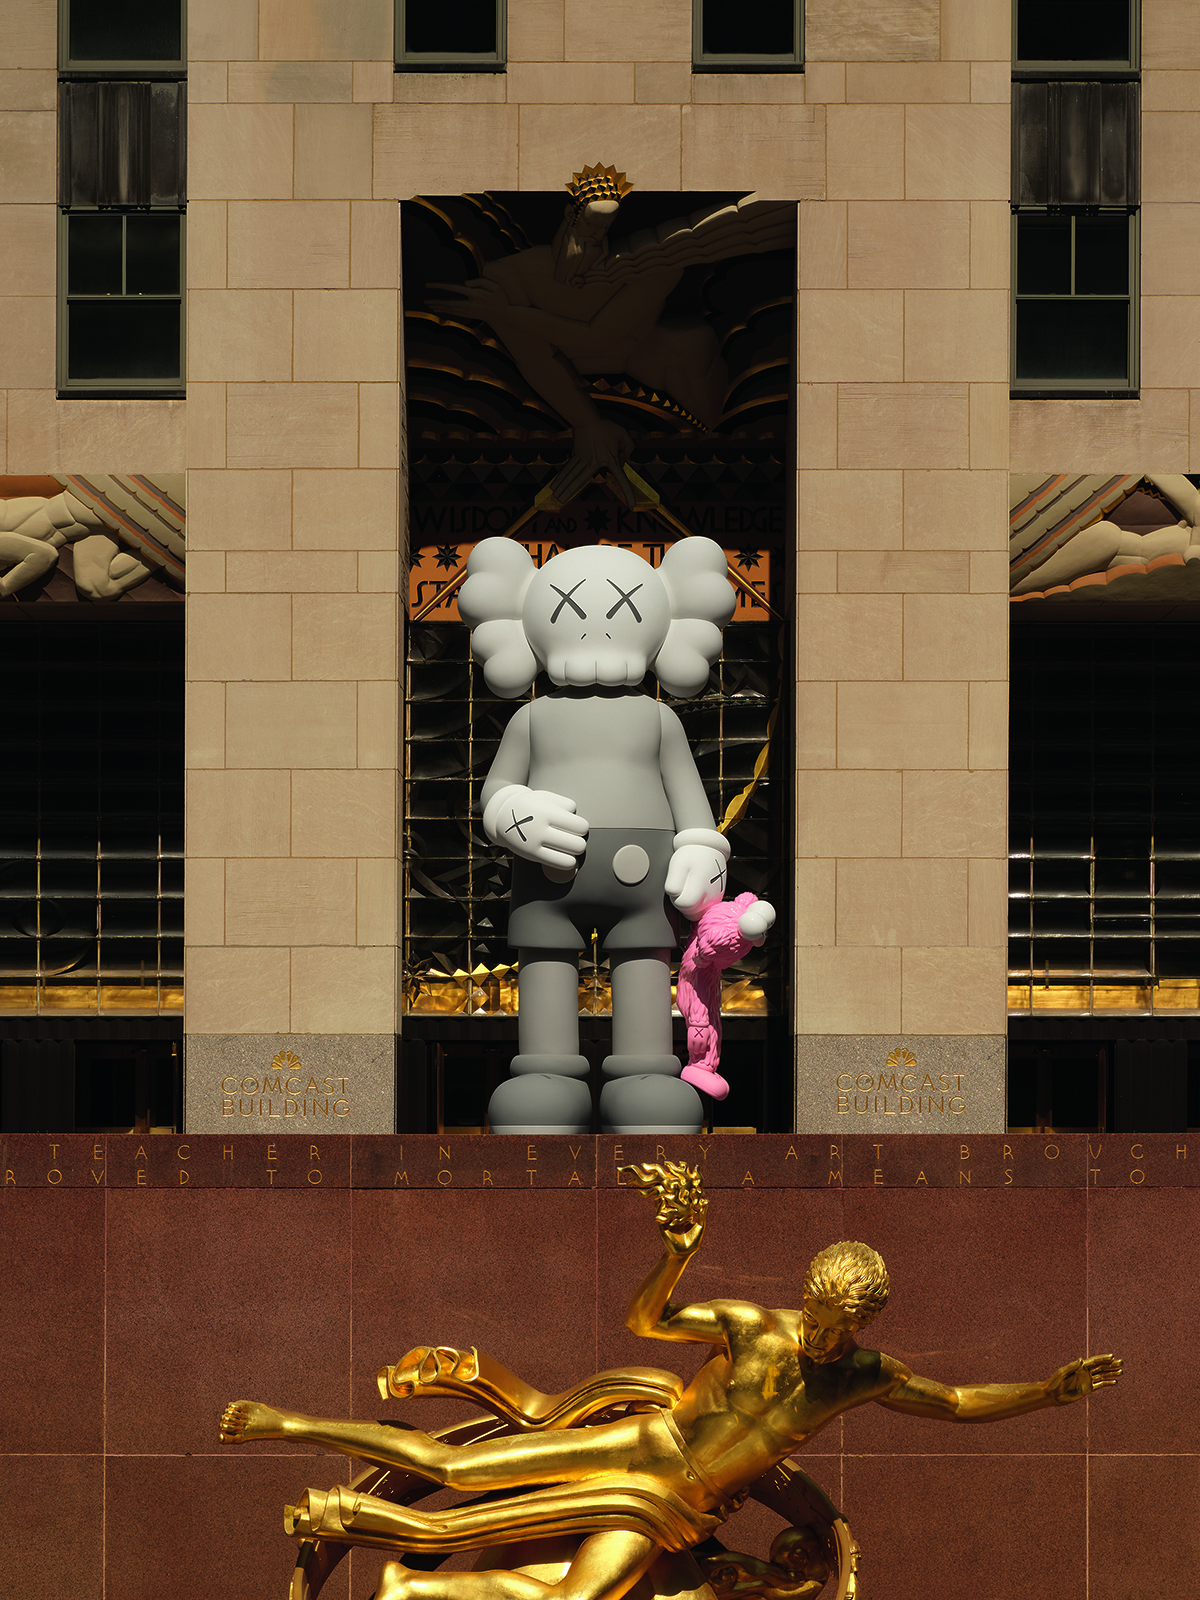 A large sculpture of a standing elephant in an entrance